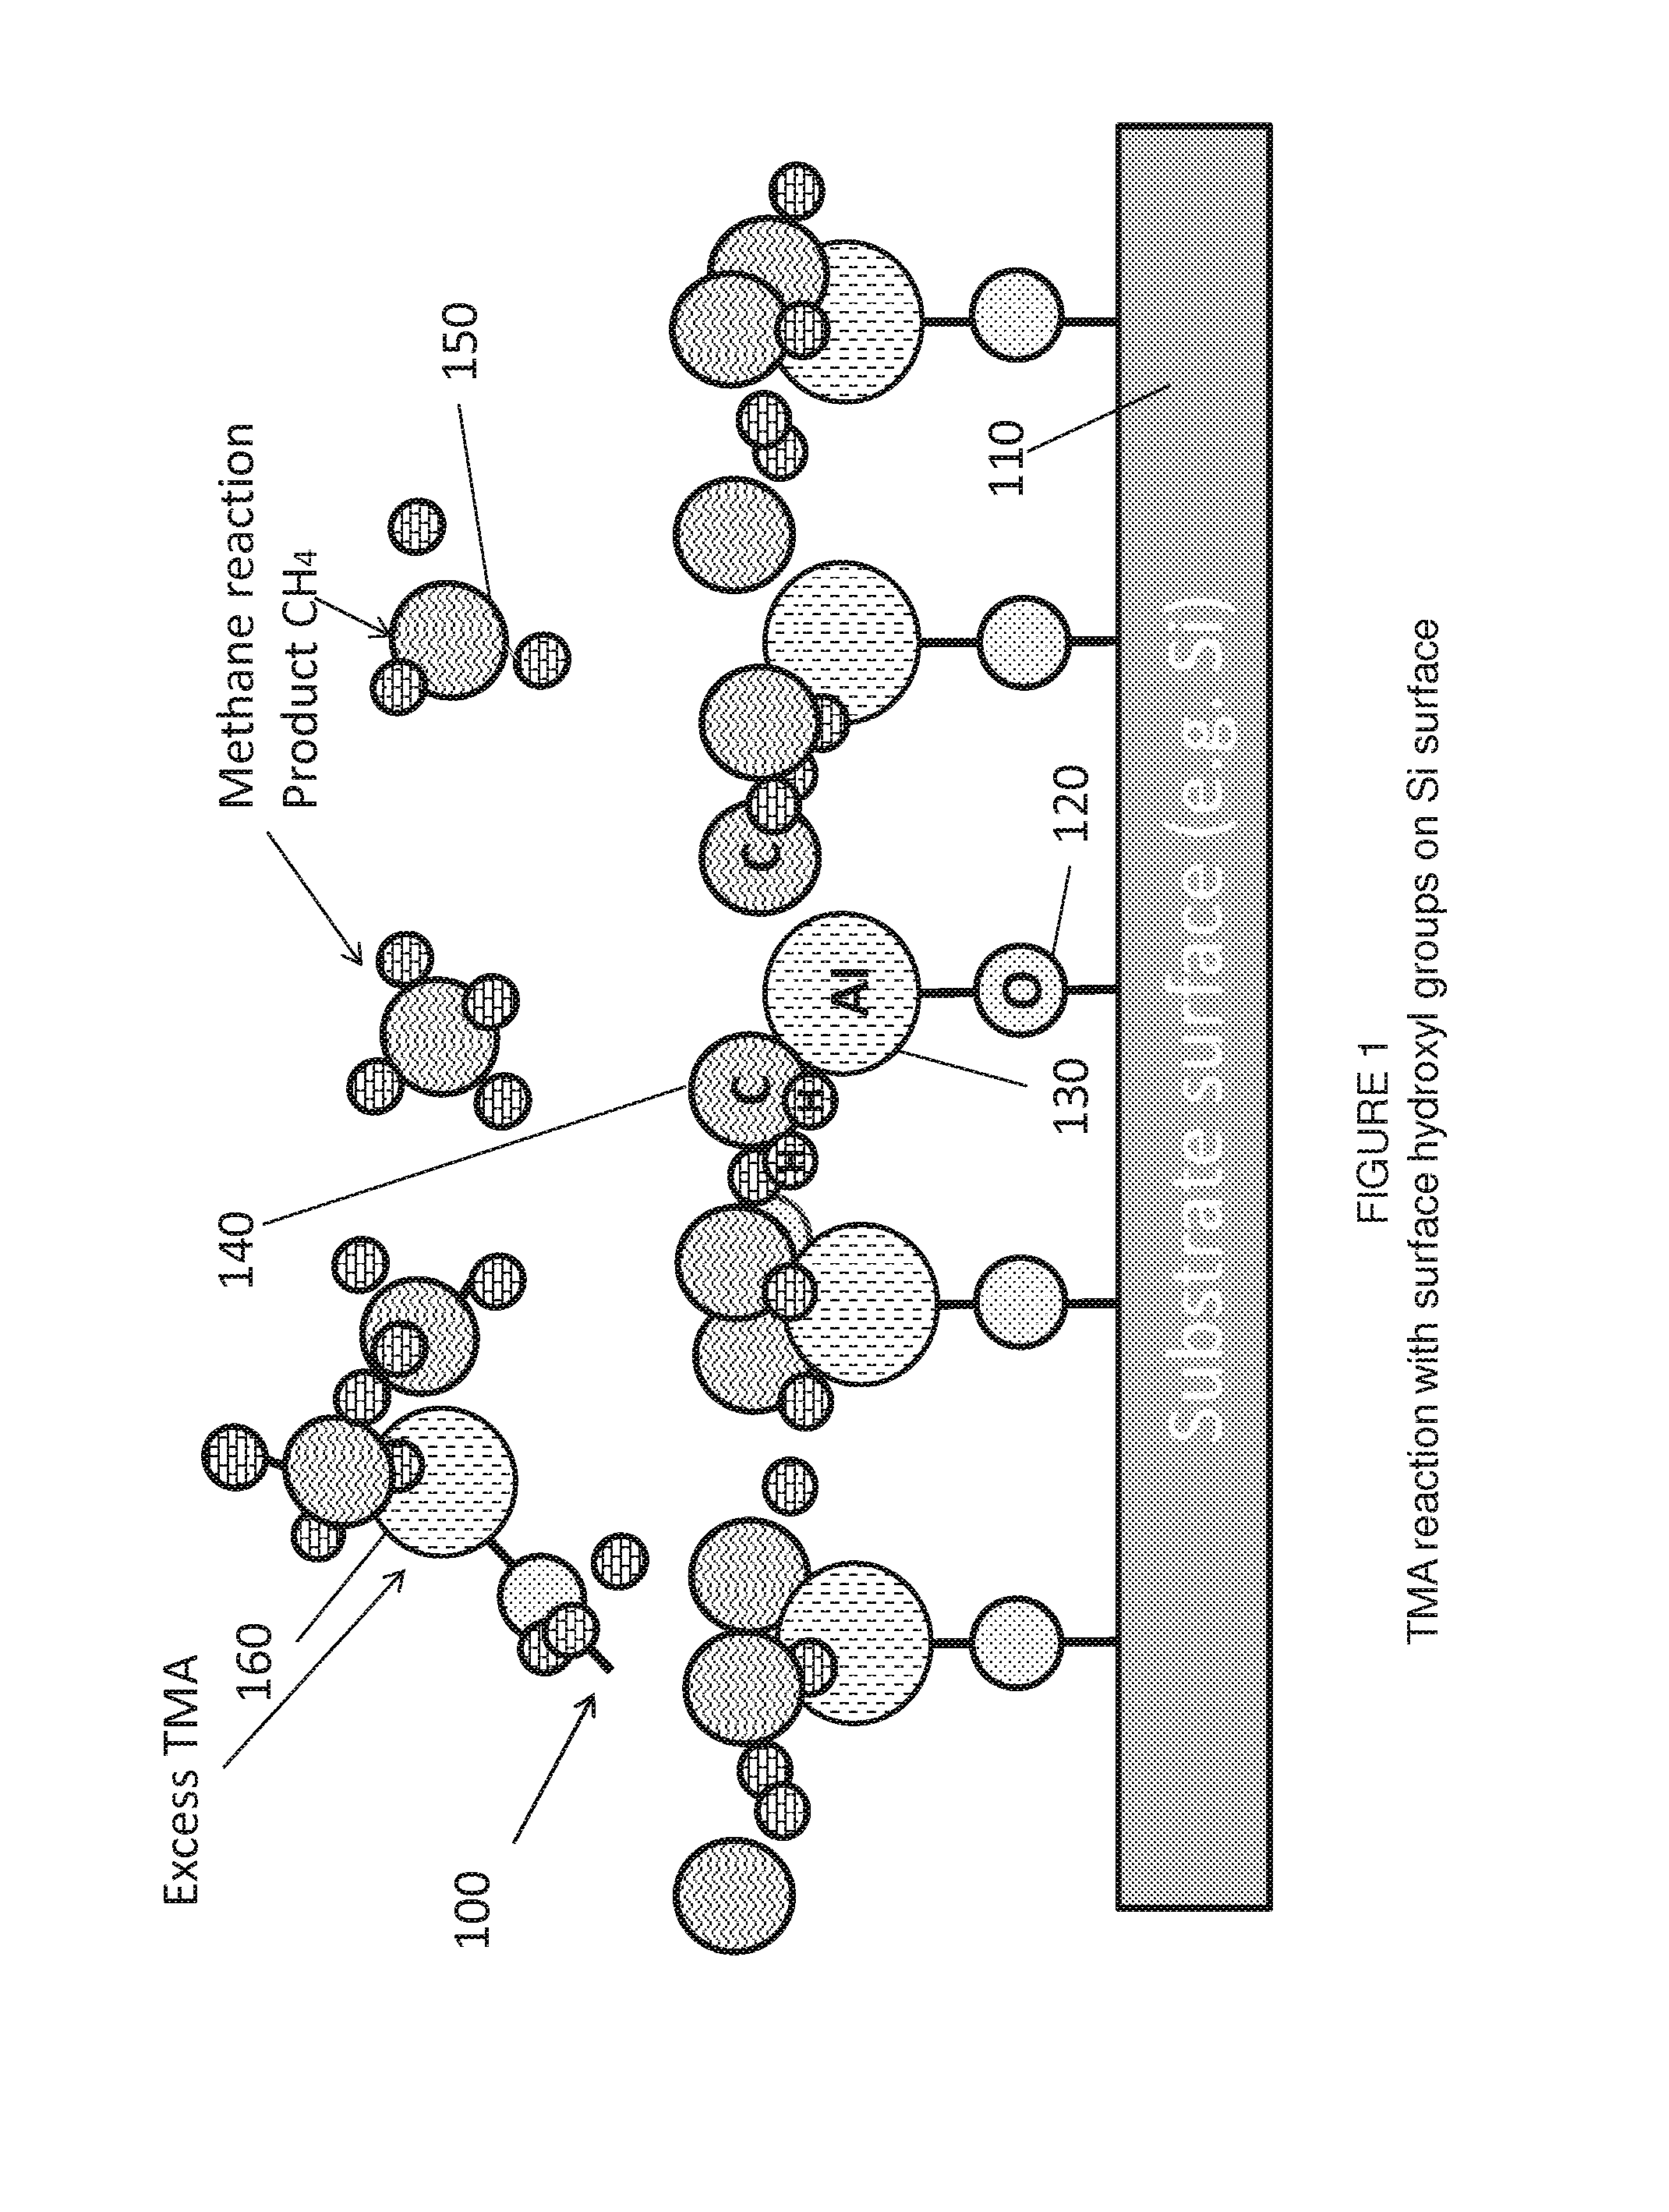 Formation of heteroepitaxial layers with rapid thermal processing to remove lattice dislocations